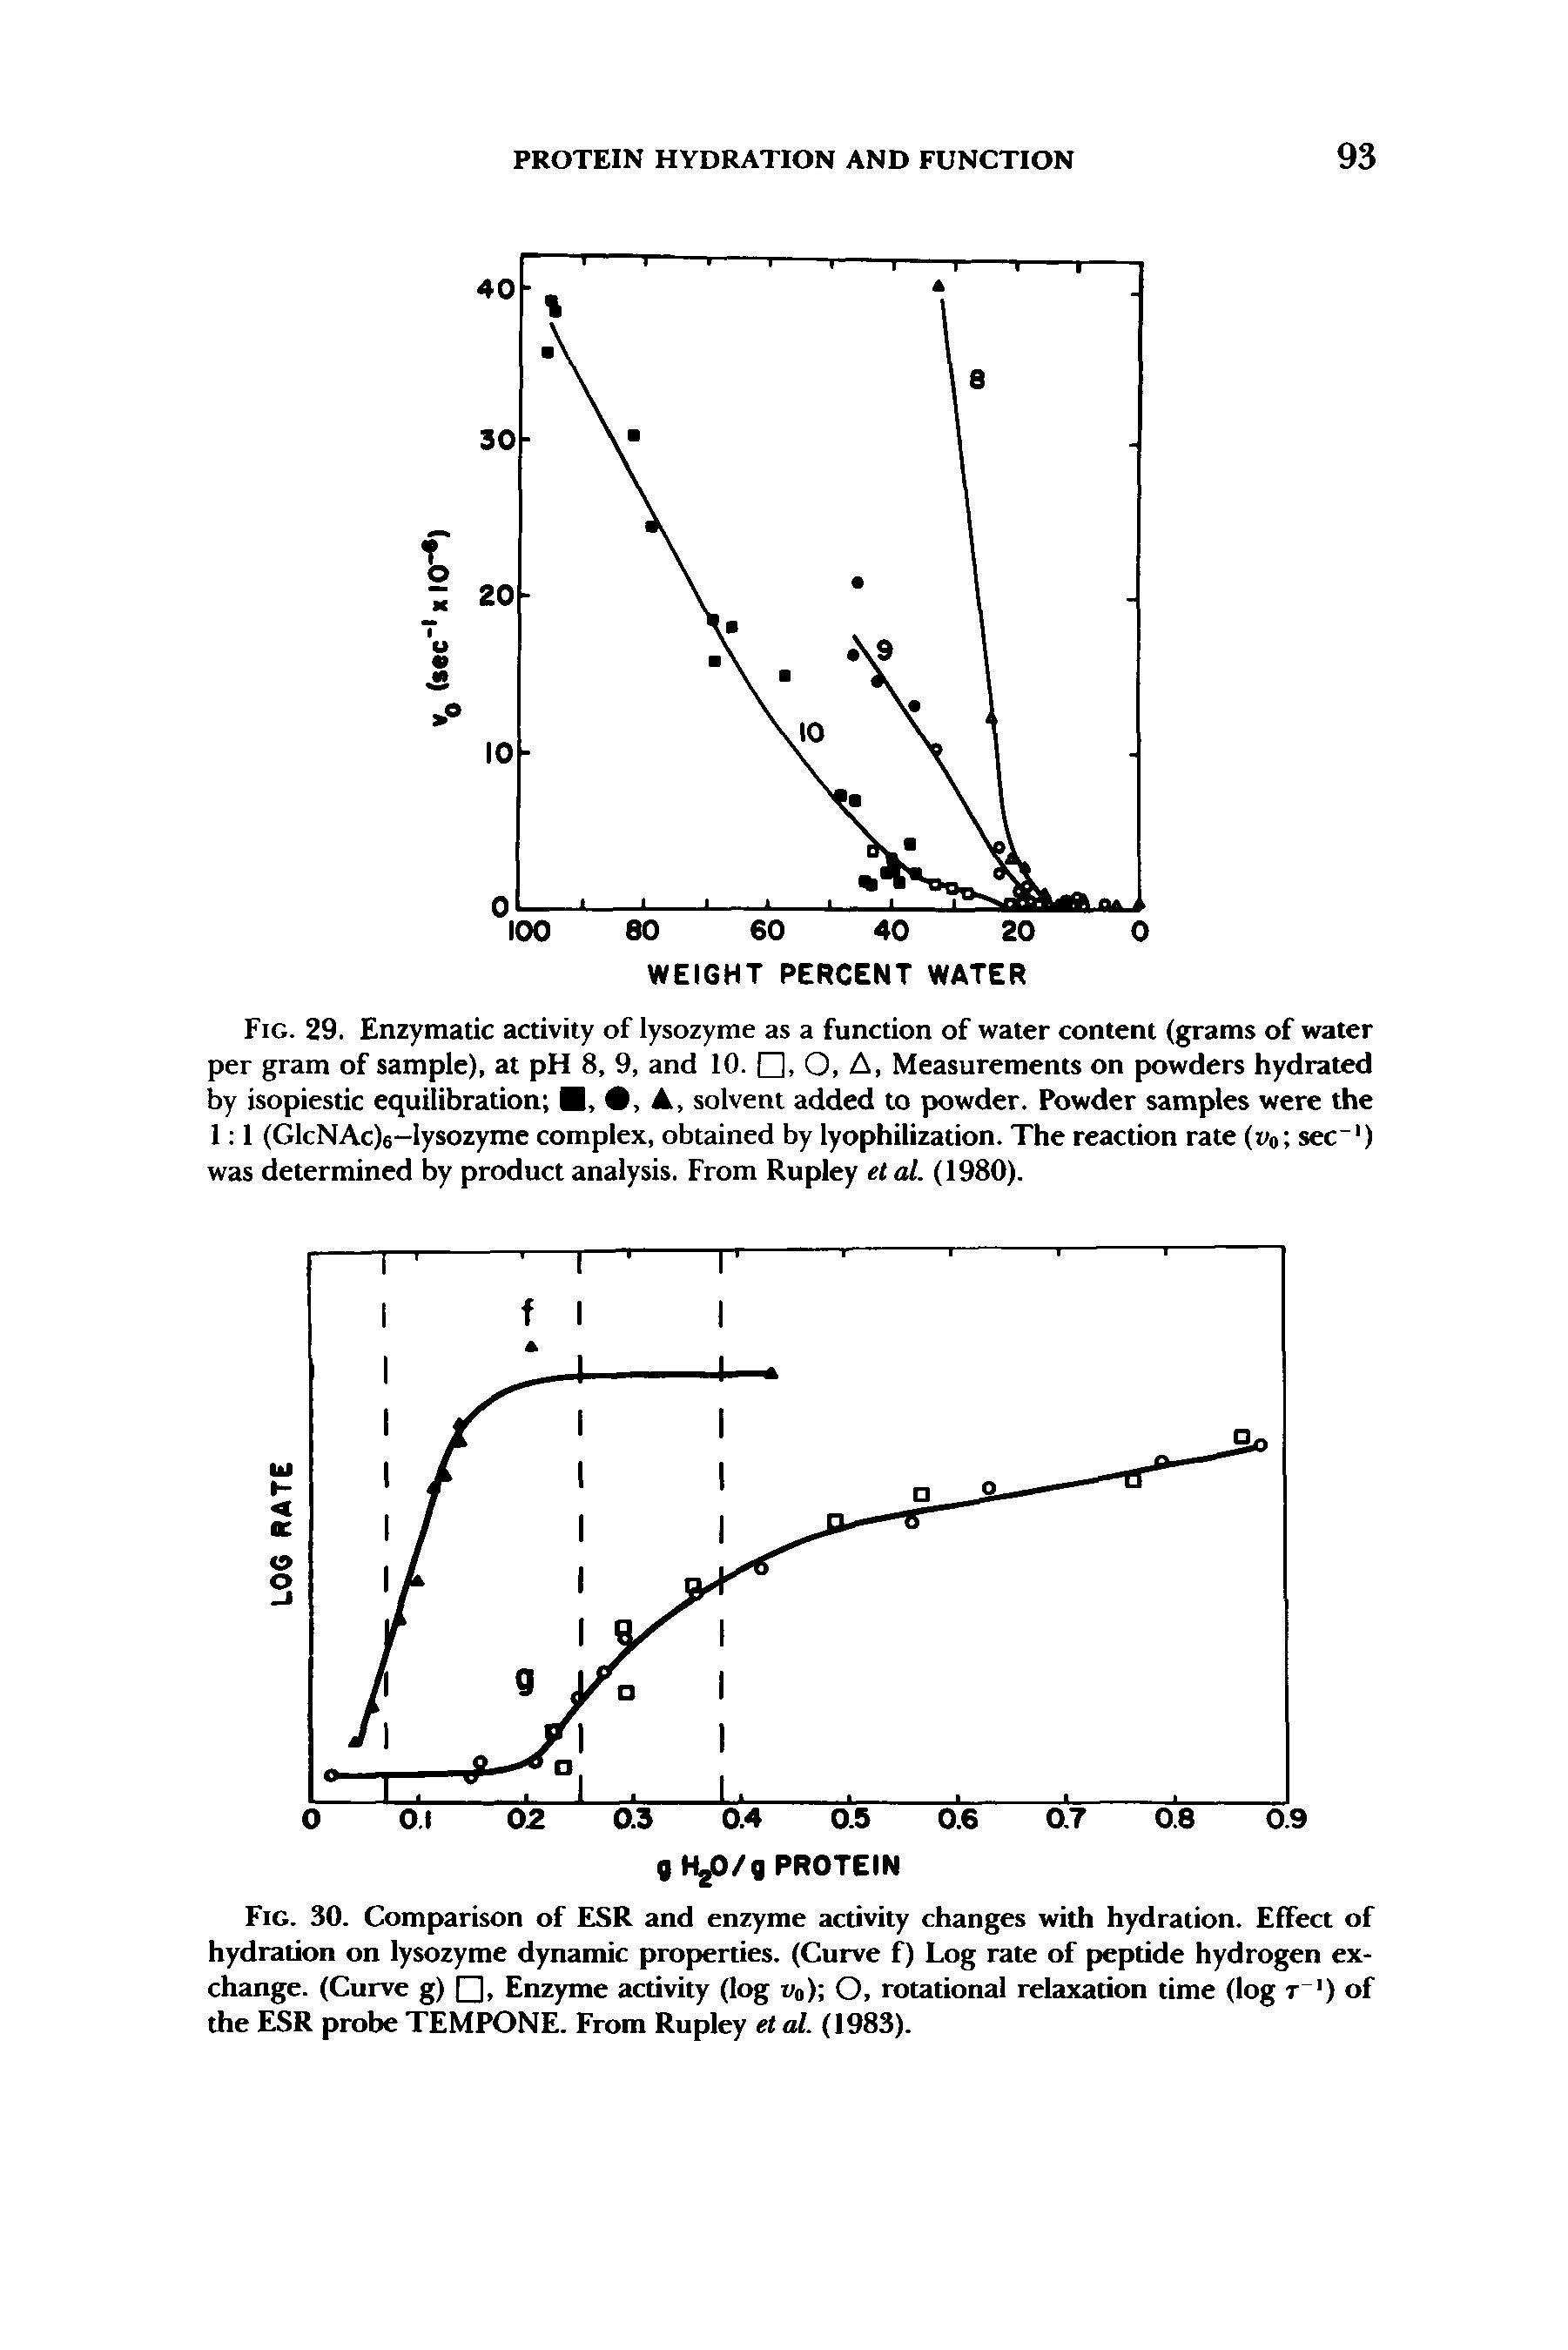 Fig. 30. Comparison of ESR and enzyme activity changes with hydration. Effect of hydration on lysozyme dynamic properties. (Curve f) Log rate of peptide hydrogen exchange. (Curve g) , Enzyme activity (log uo) O, rotational relaxation time (log t ) of the ESR probe TEMPONE. From Rupley et al. (1983).